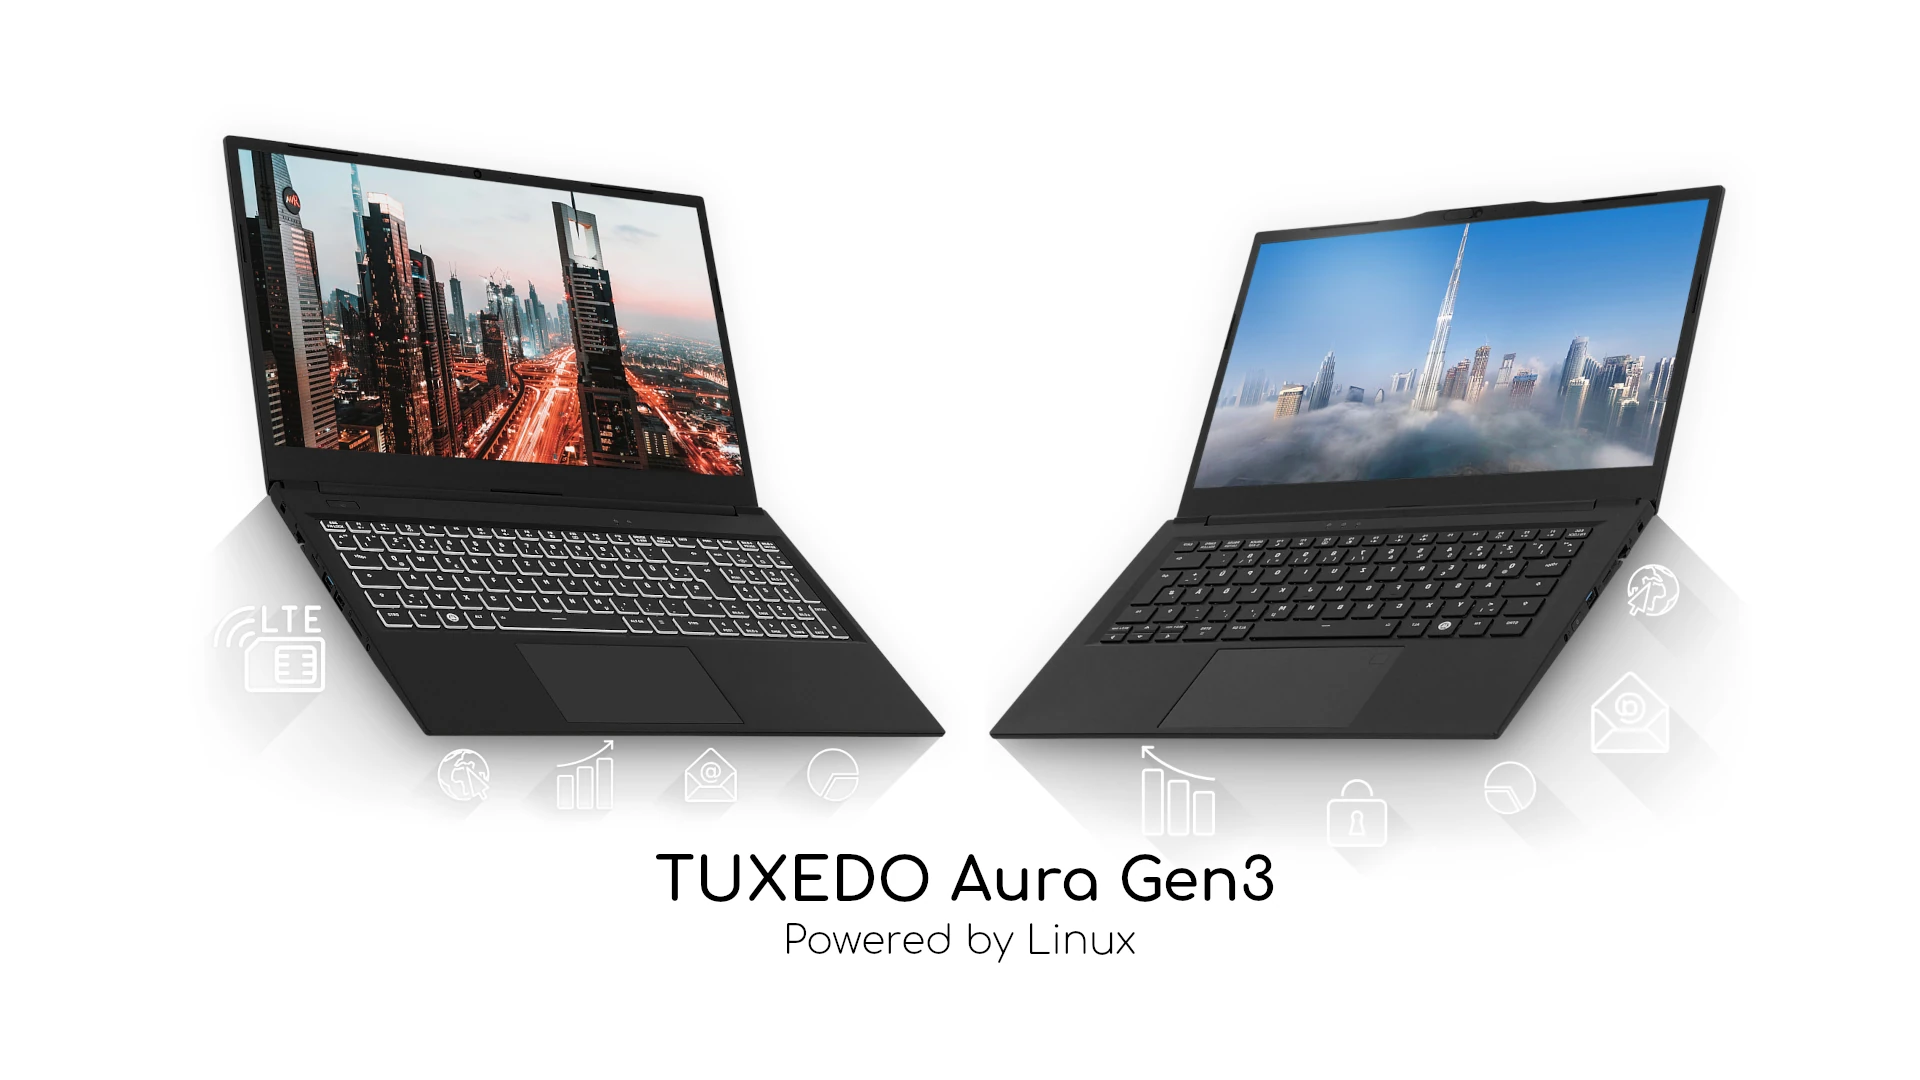 TUXEDO Aura Linux Laptops Now Come with Wi-Fi 6E, LTE Modem, and TPM 2.0